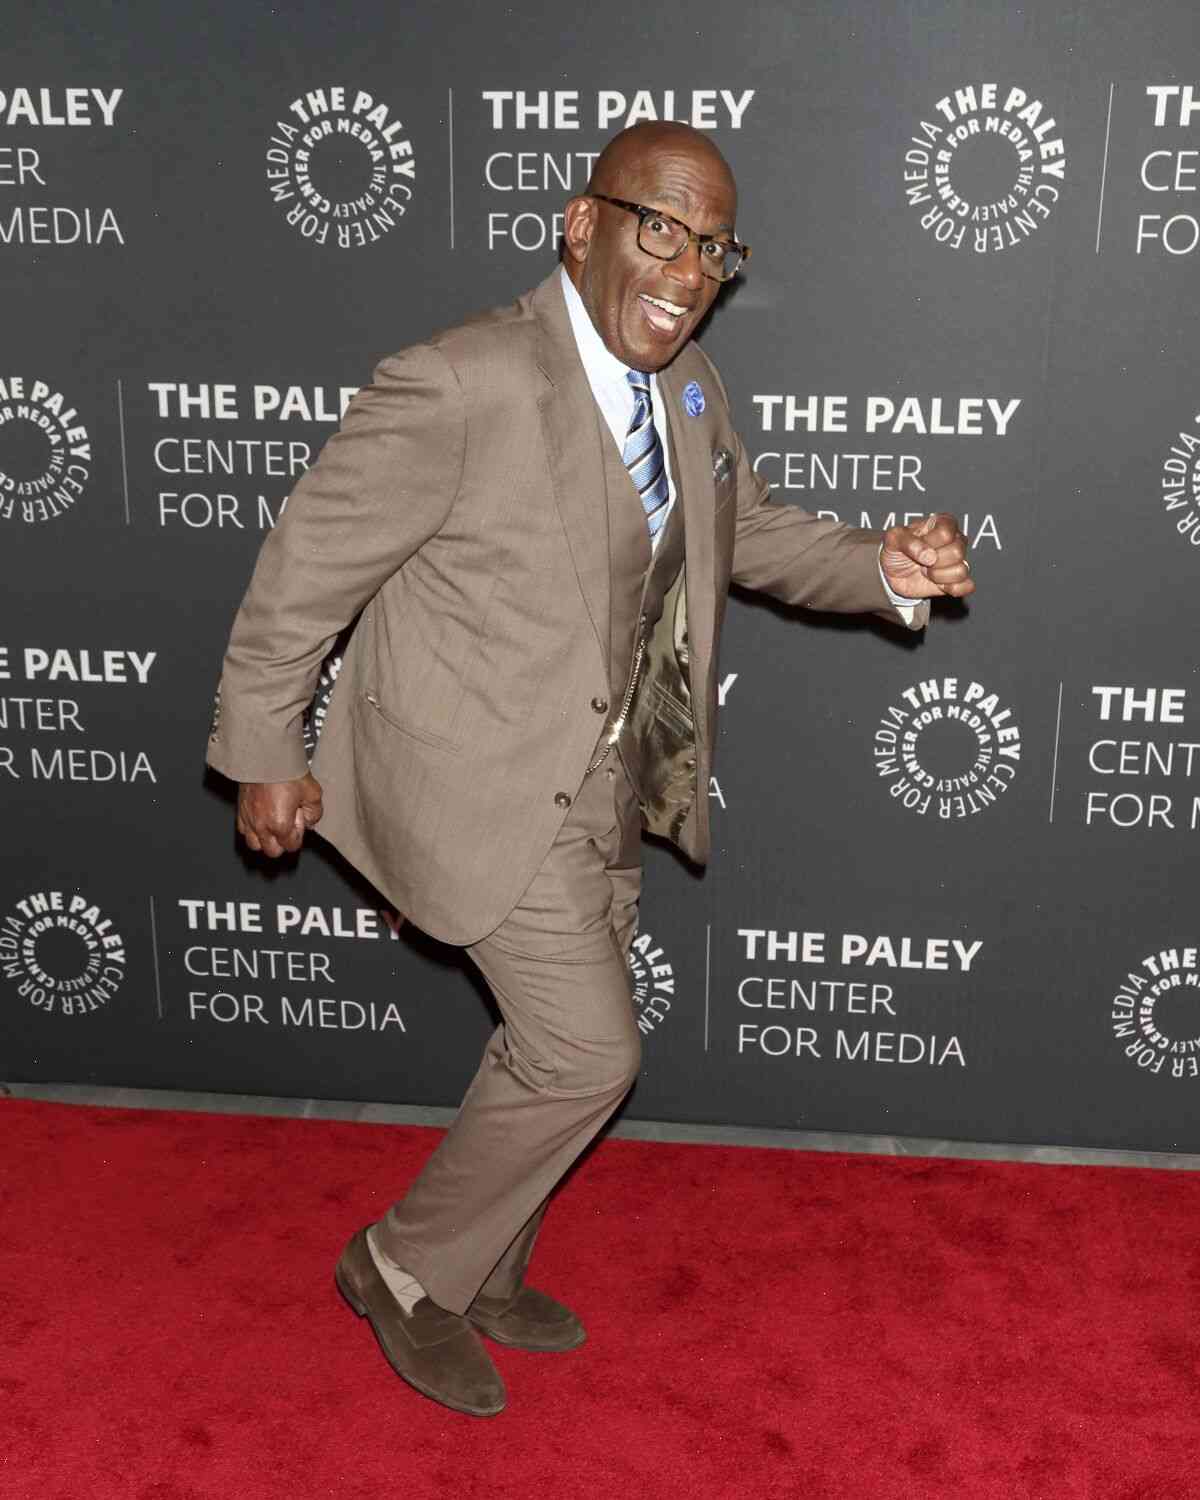 Al Roker: 'Today' host broke his leg playing basketball with his 9-year-old daughter when he was 21